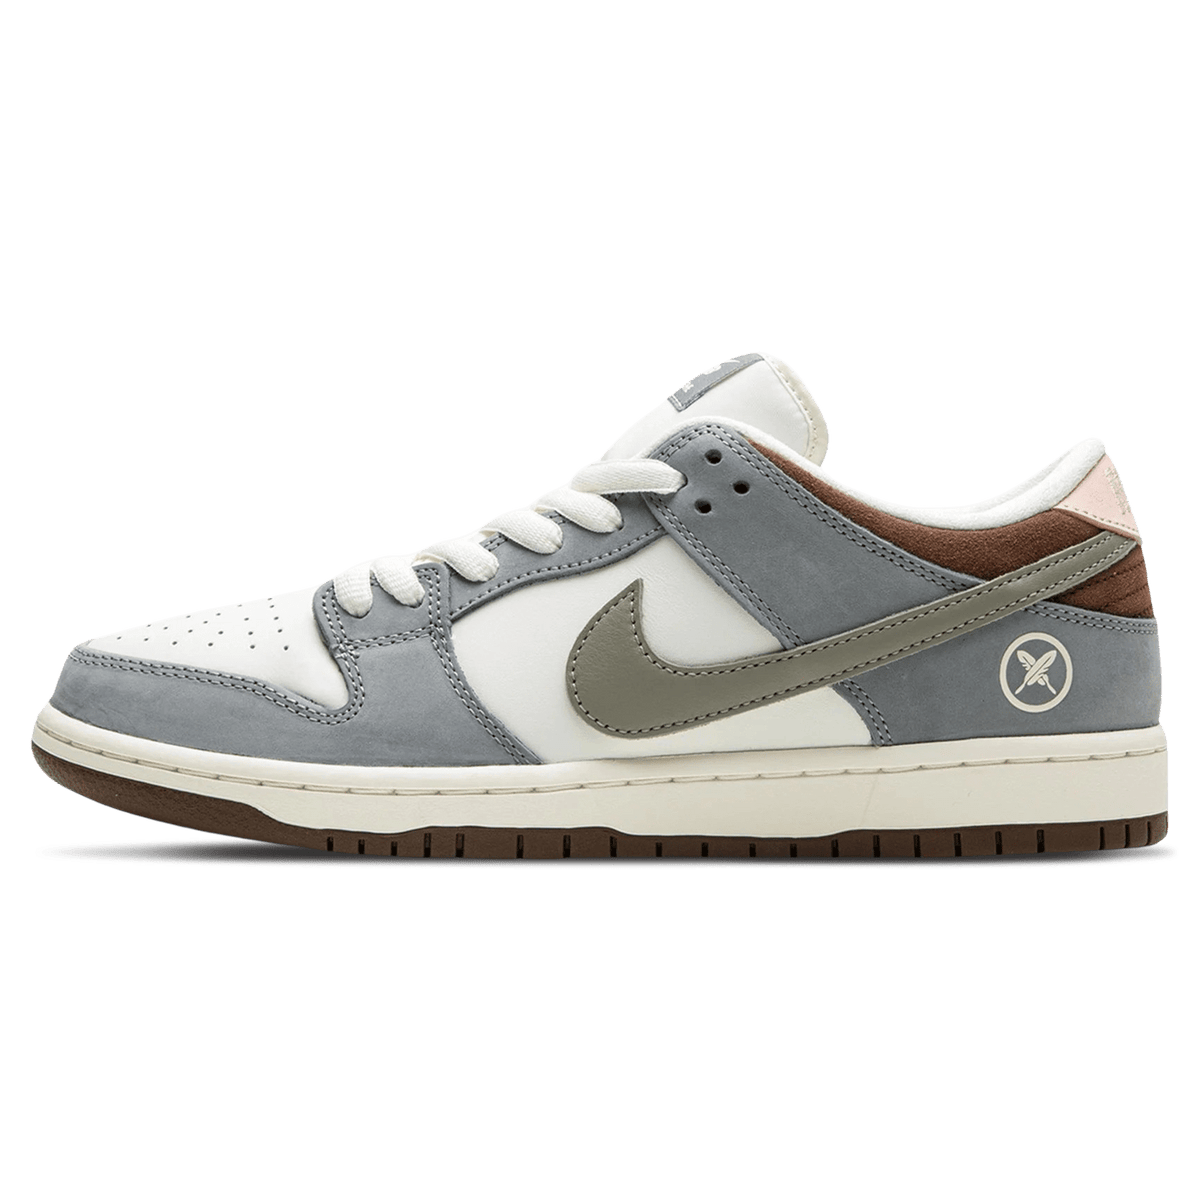 nike gravity all star shoes 2009 2017 chief of india price - UrlfreezeShops